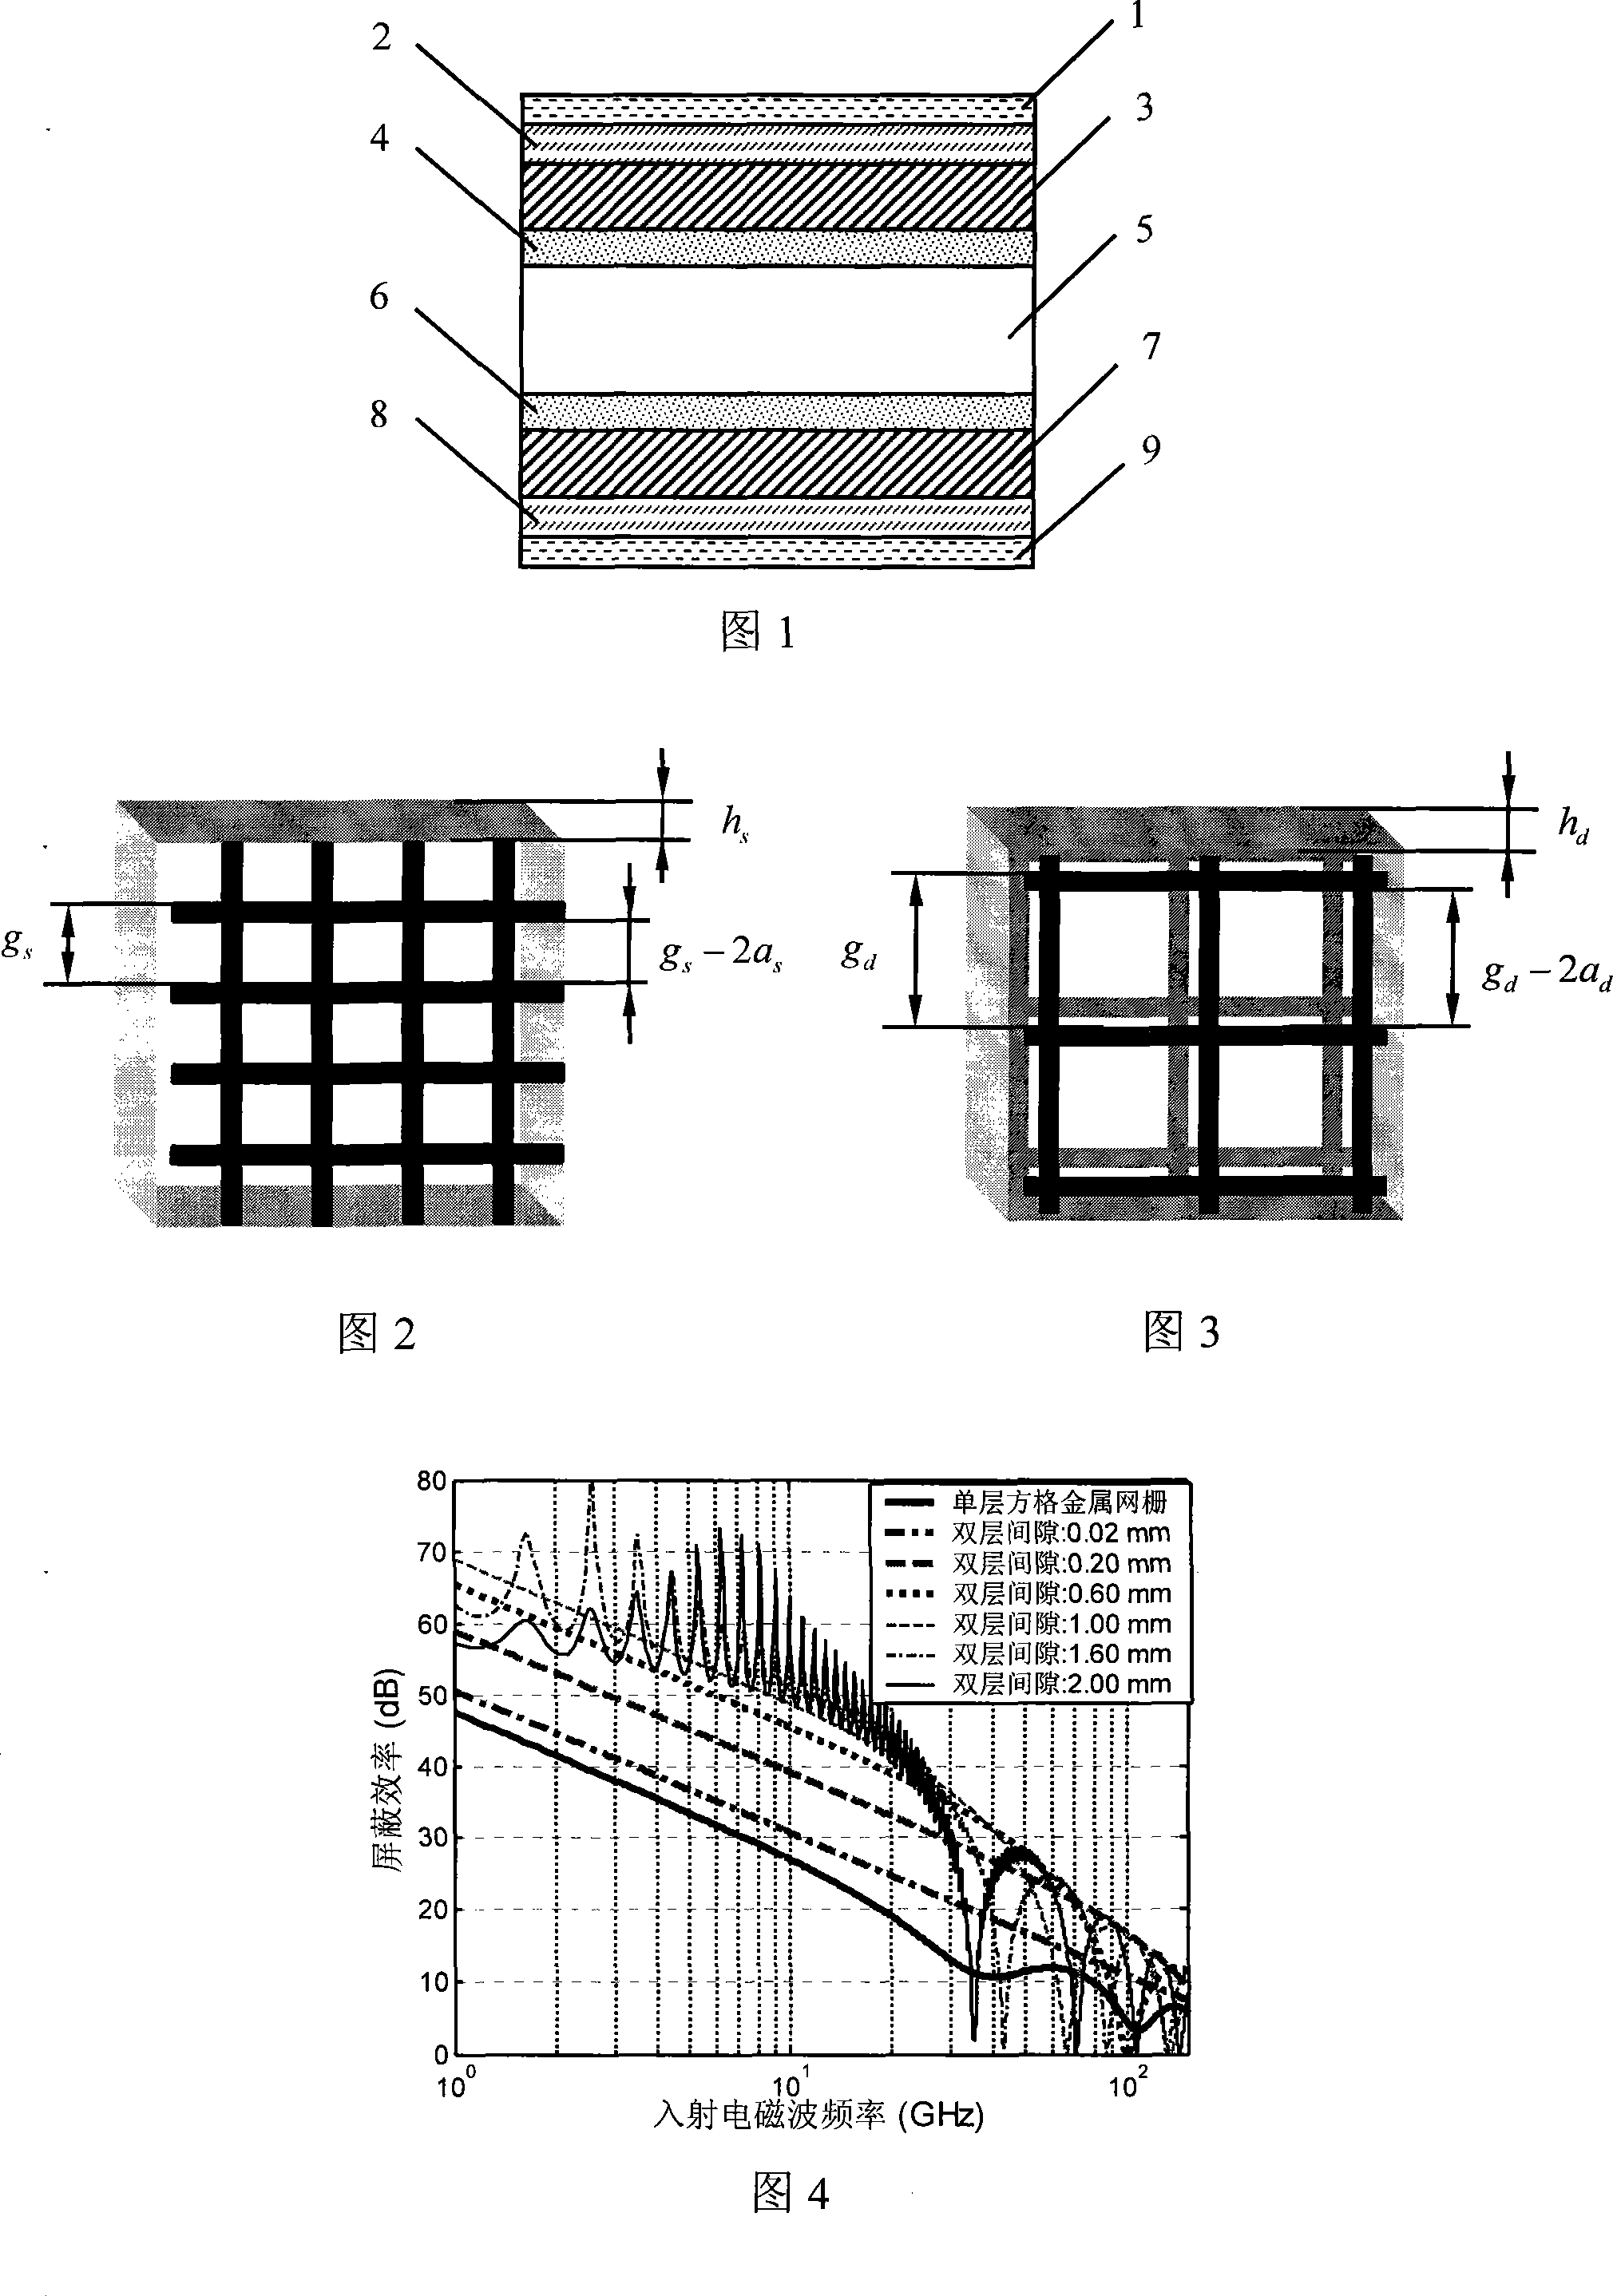 Electromagnetic shielding optical window with double-layer pane metal gridding structure